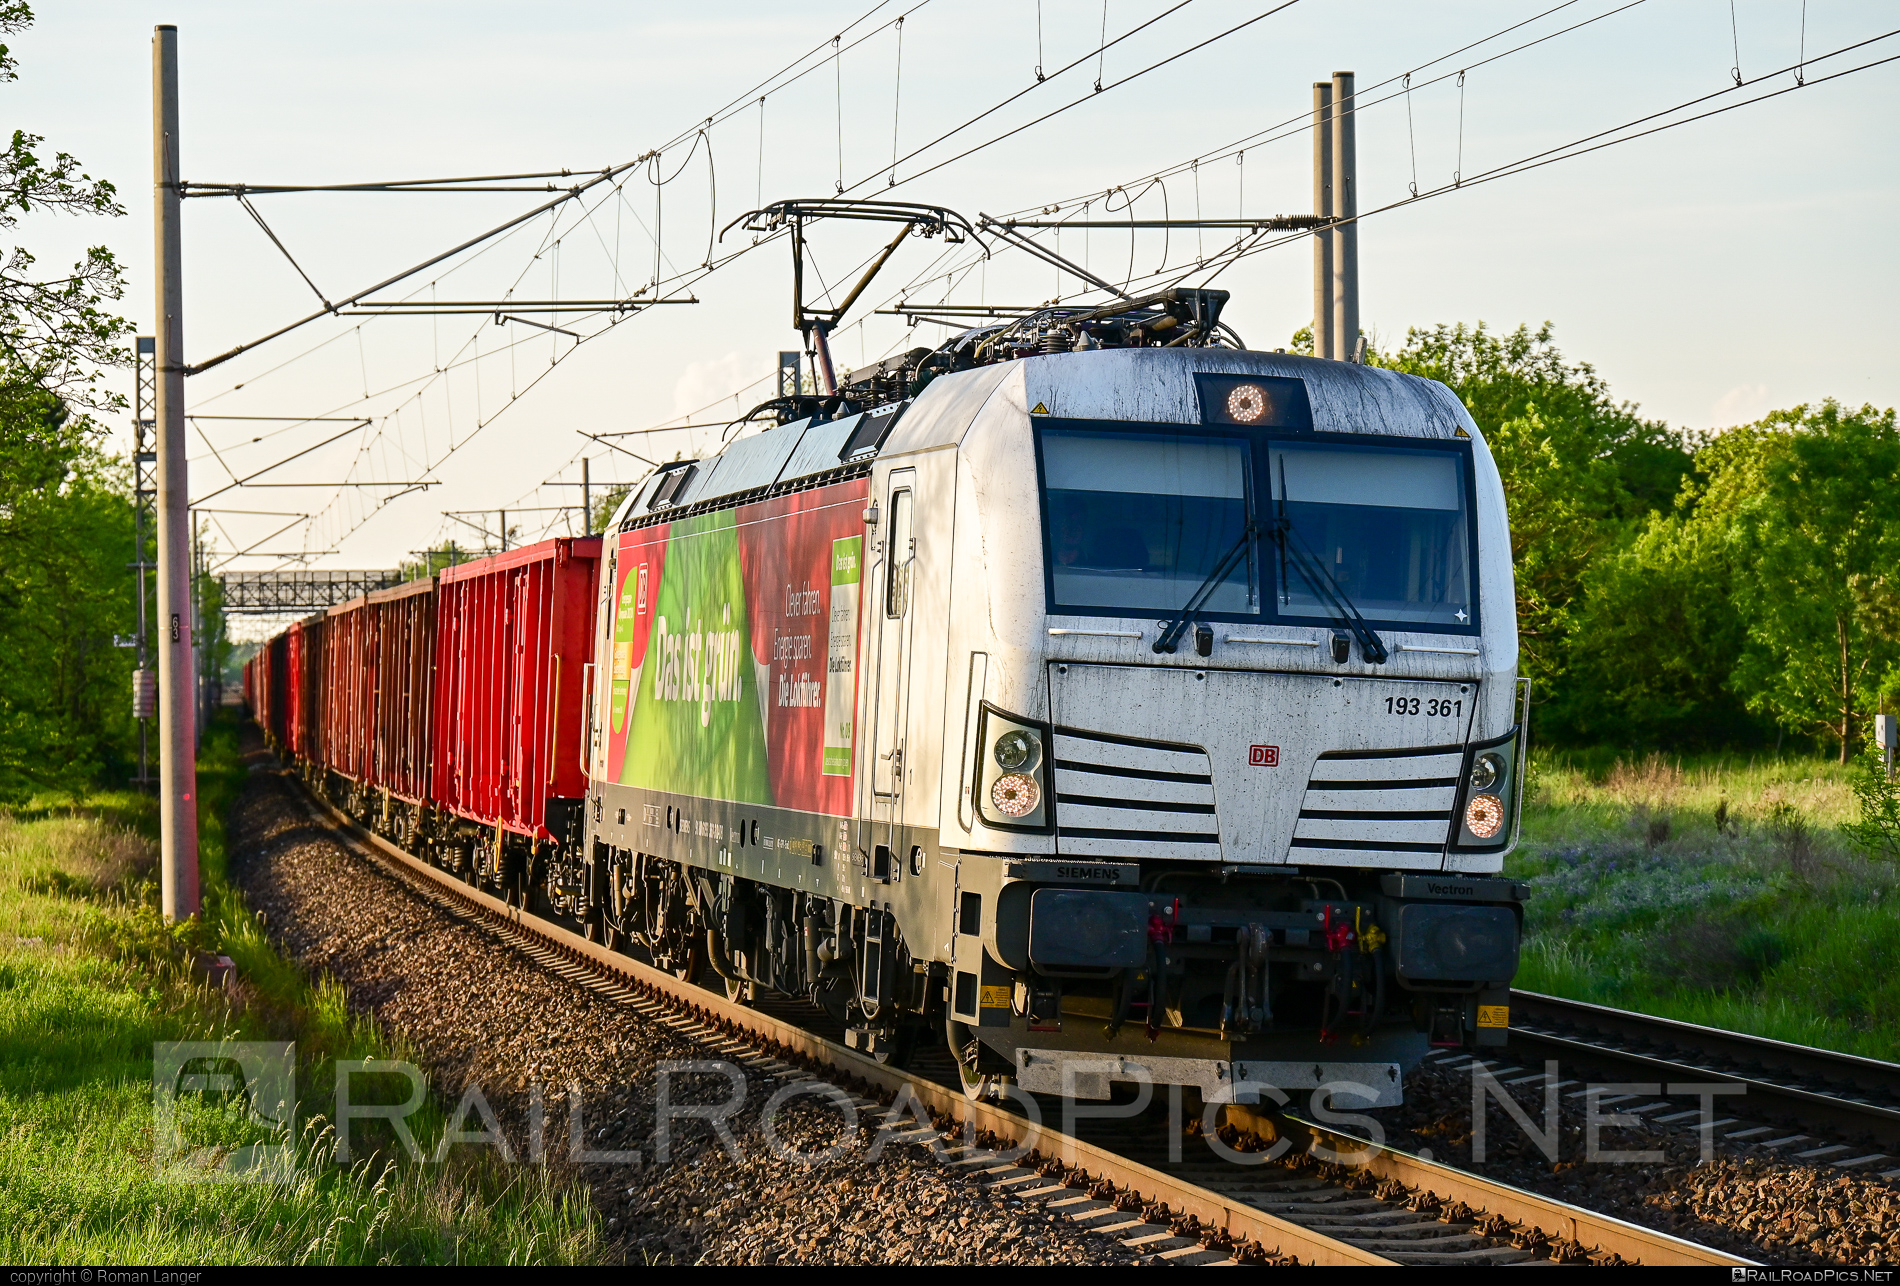 Siemens Vectron MS - 193 361 operated by DB Cargo AG #db #dbcargo #dbcargoag #openwagon #siemens #siemensvectron #siemensvectronms #vectron #vectronms